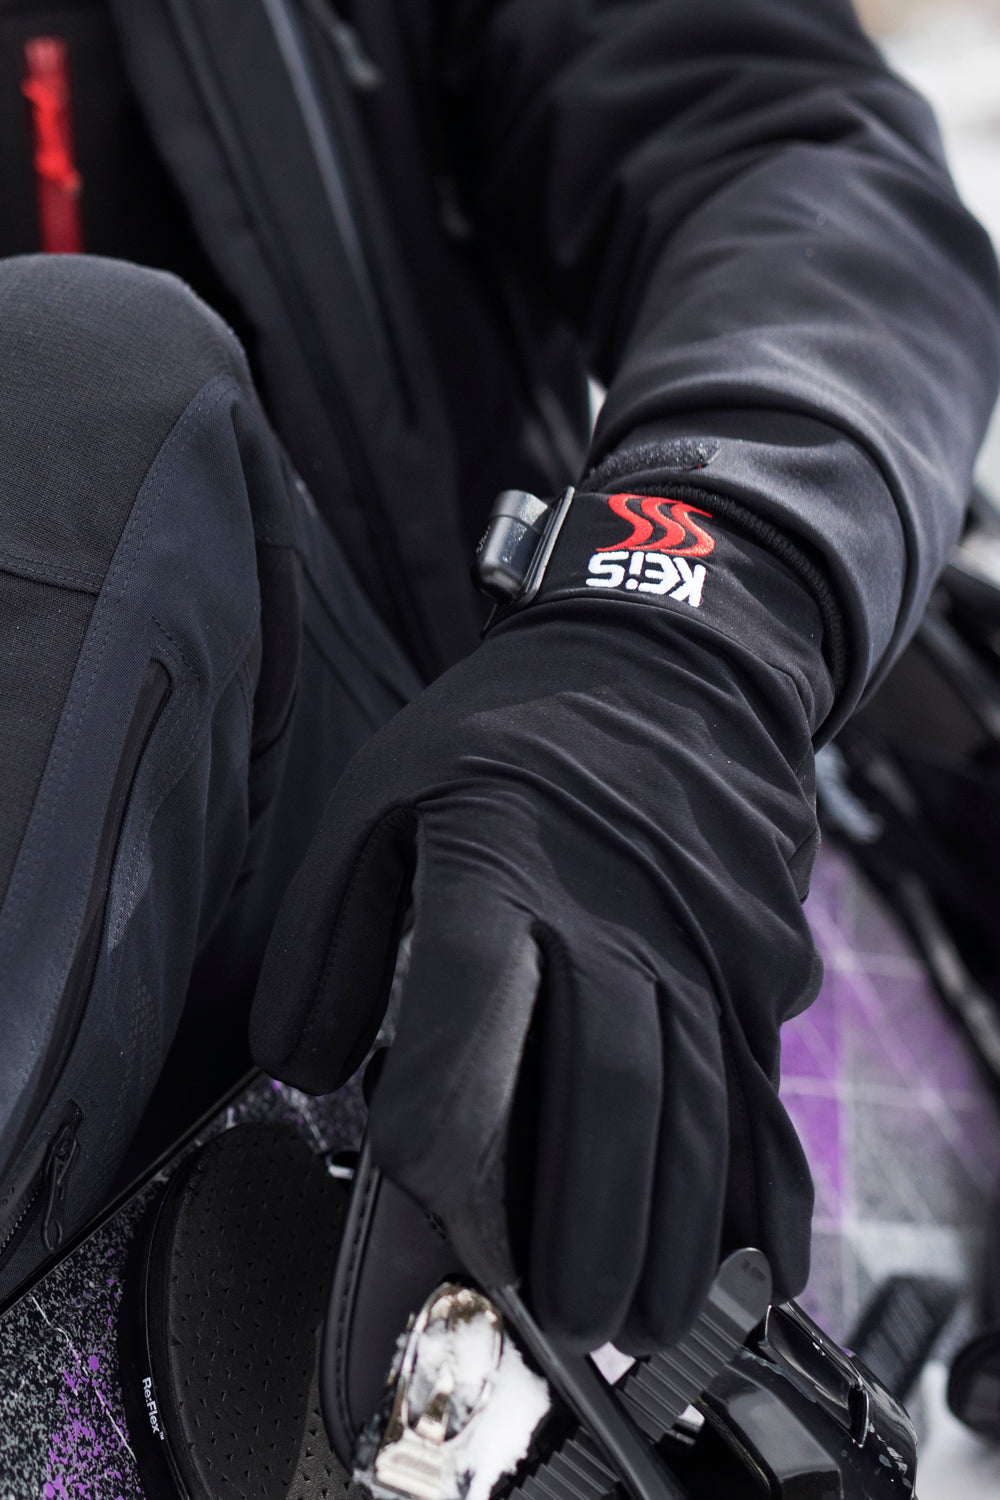 Wear Keis Heated Inner Gloves for many outdoor activities